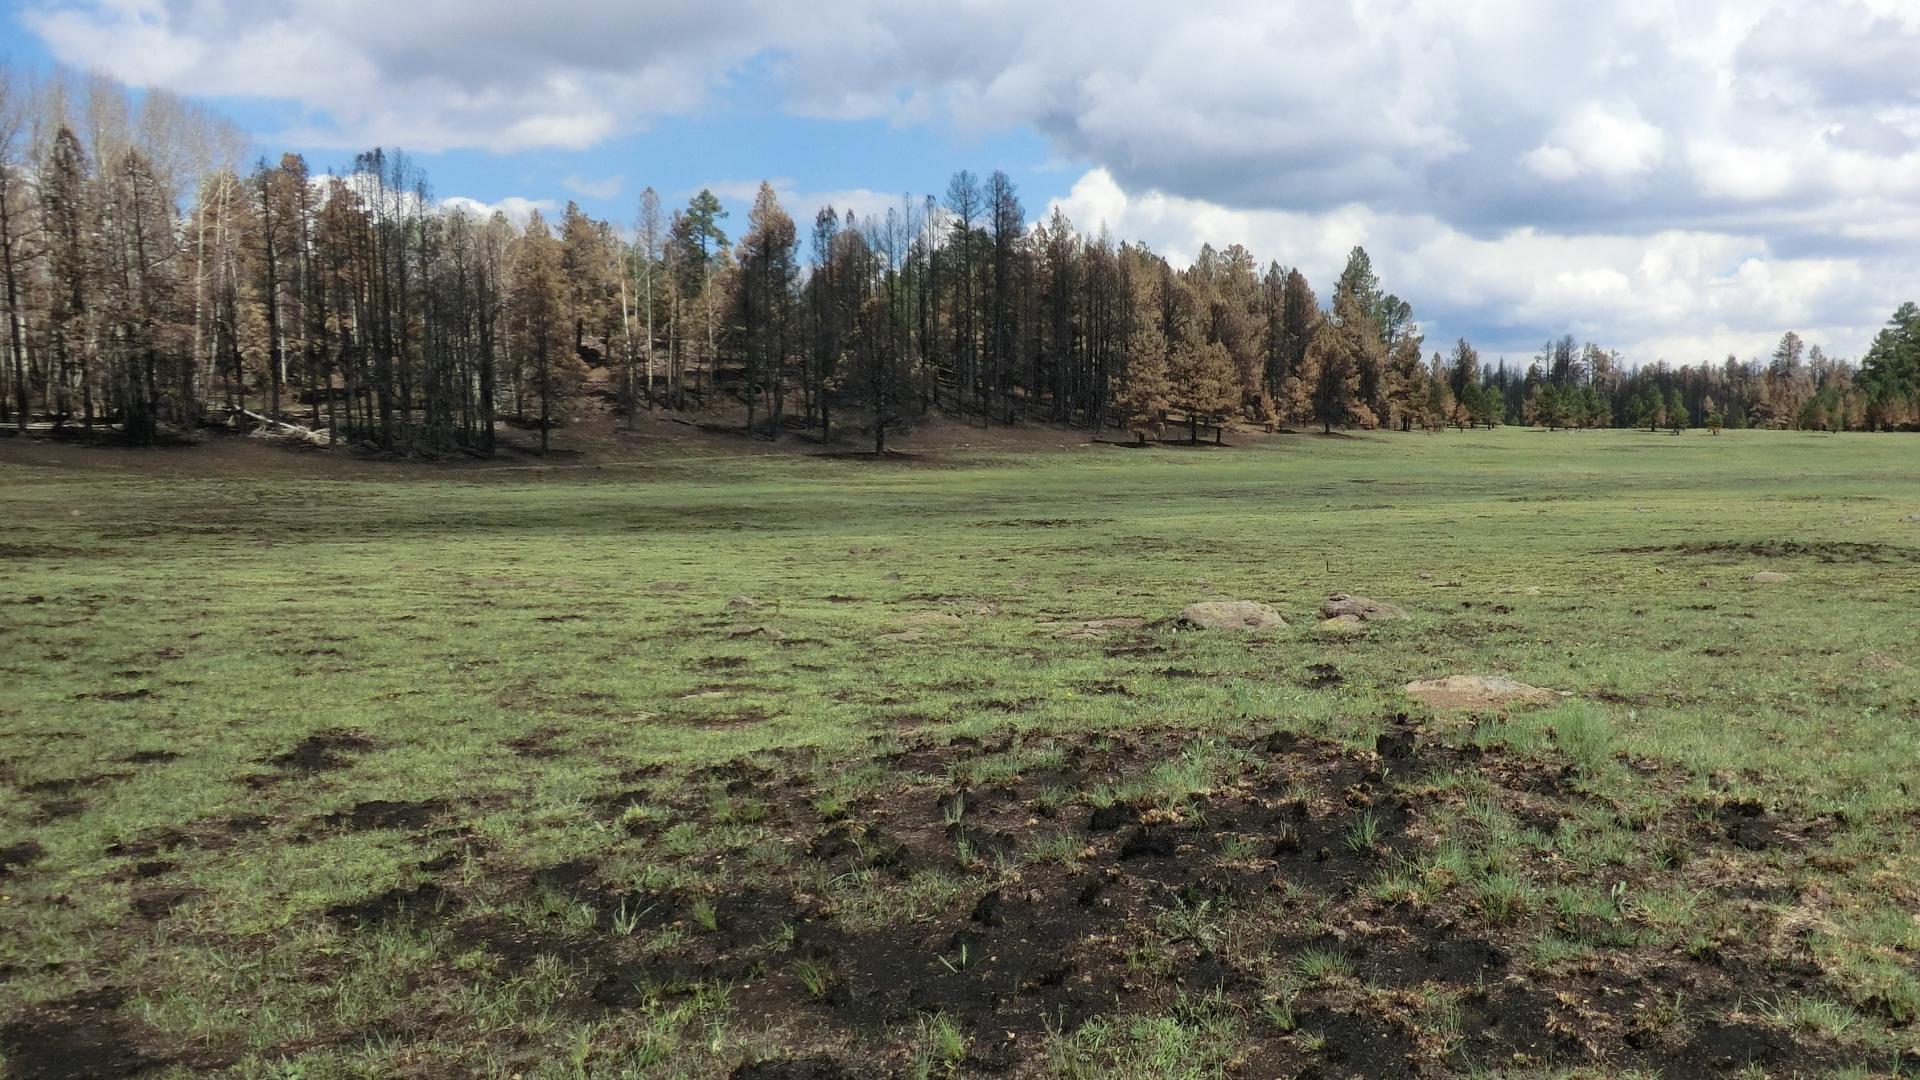 recently burned mountain meadow